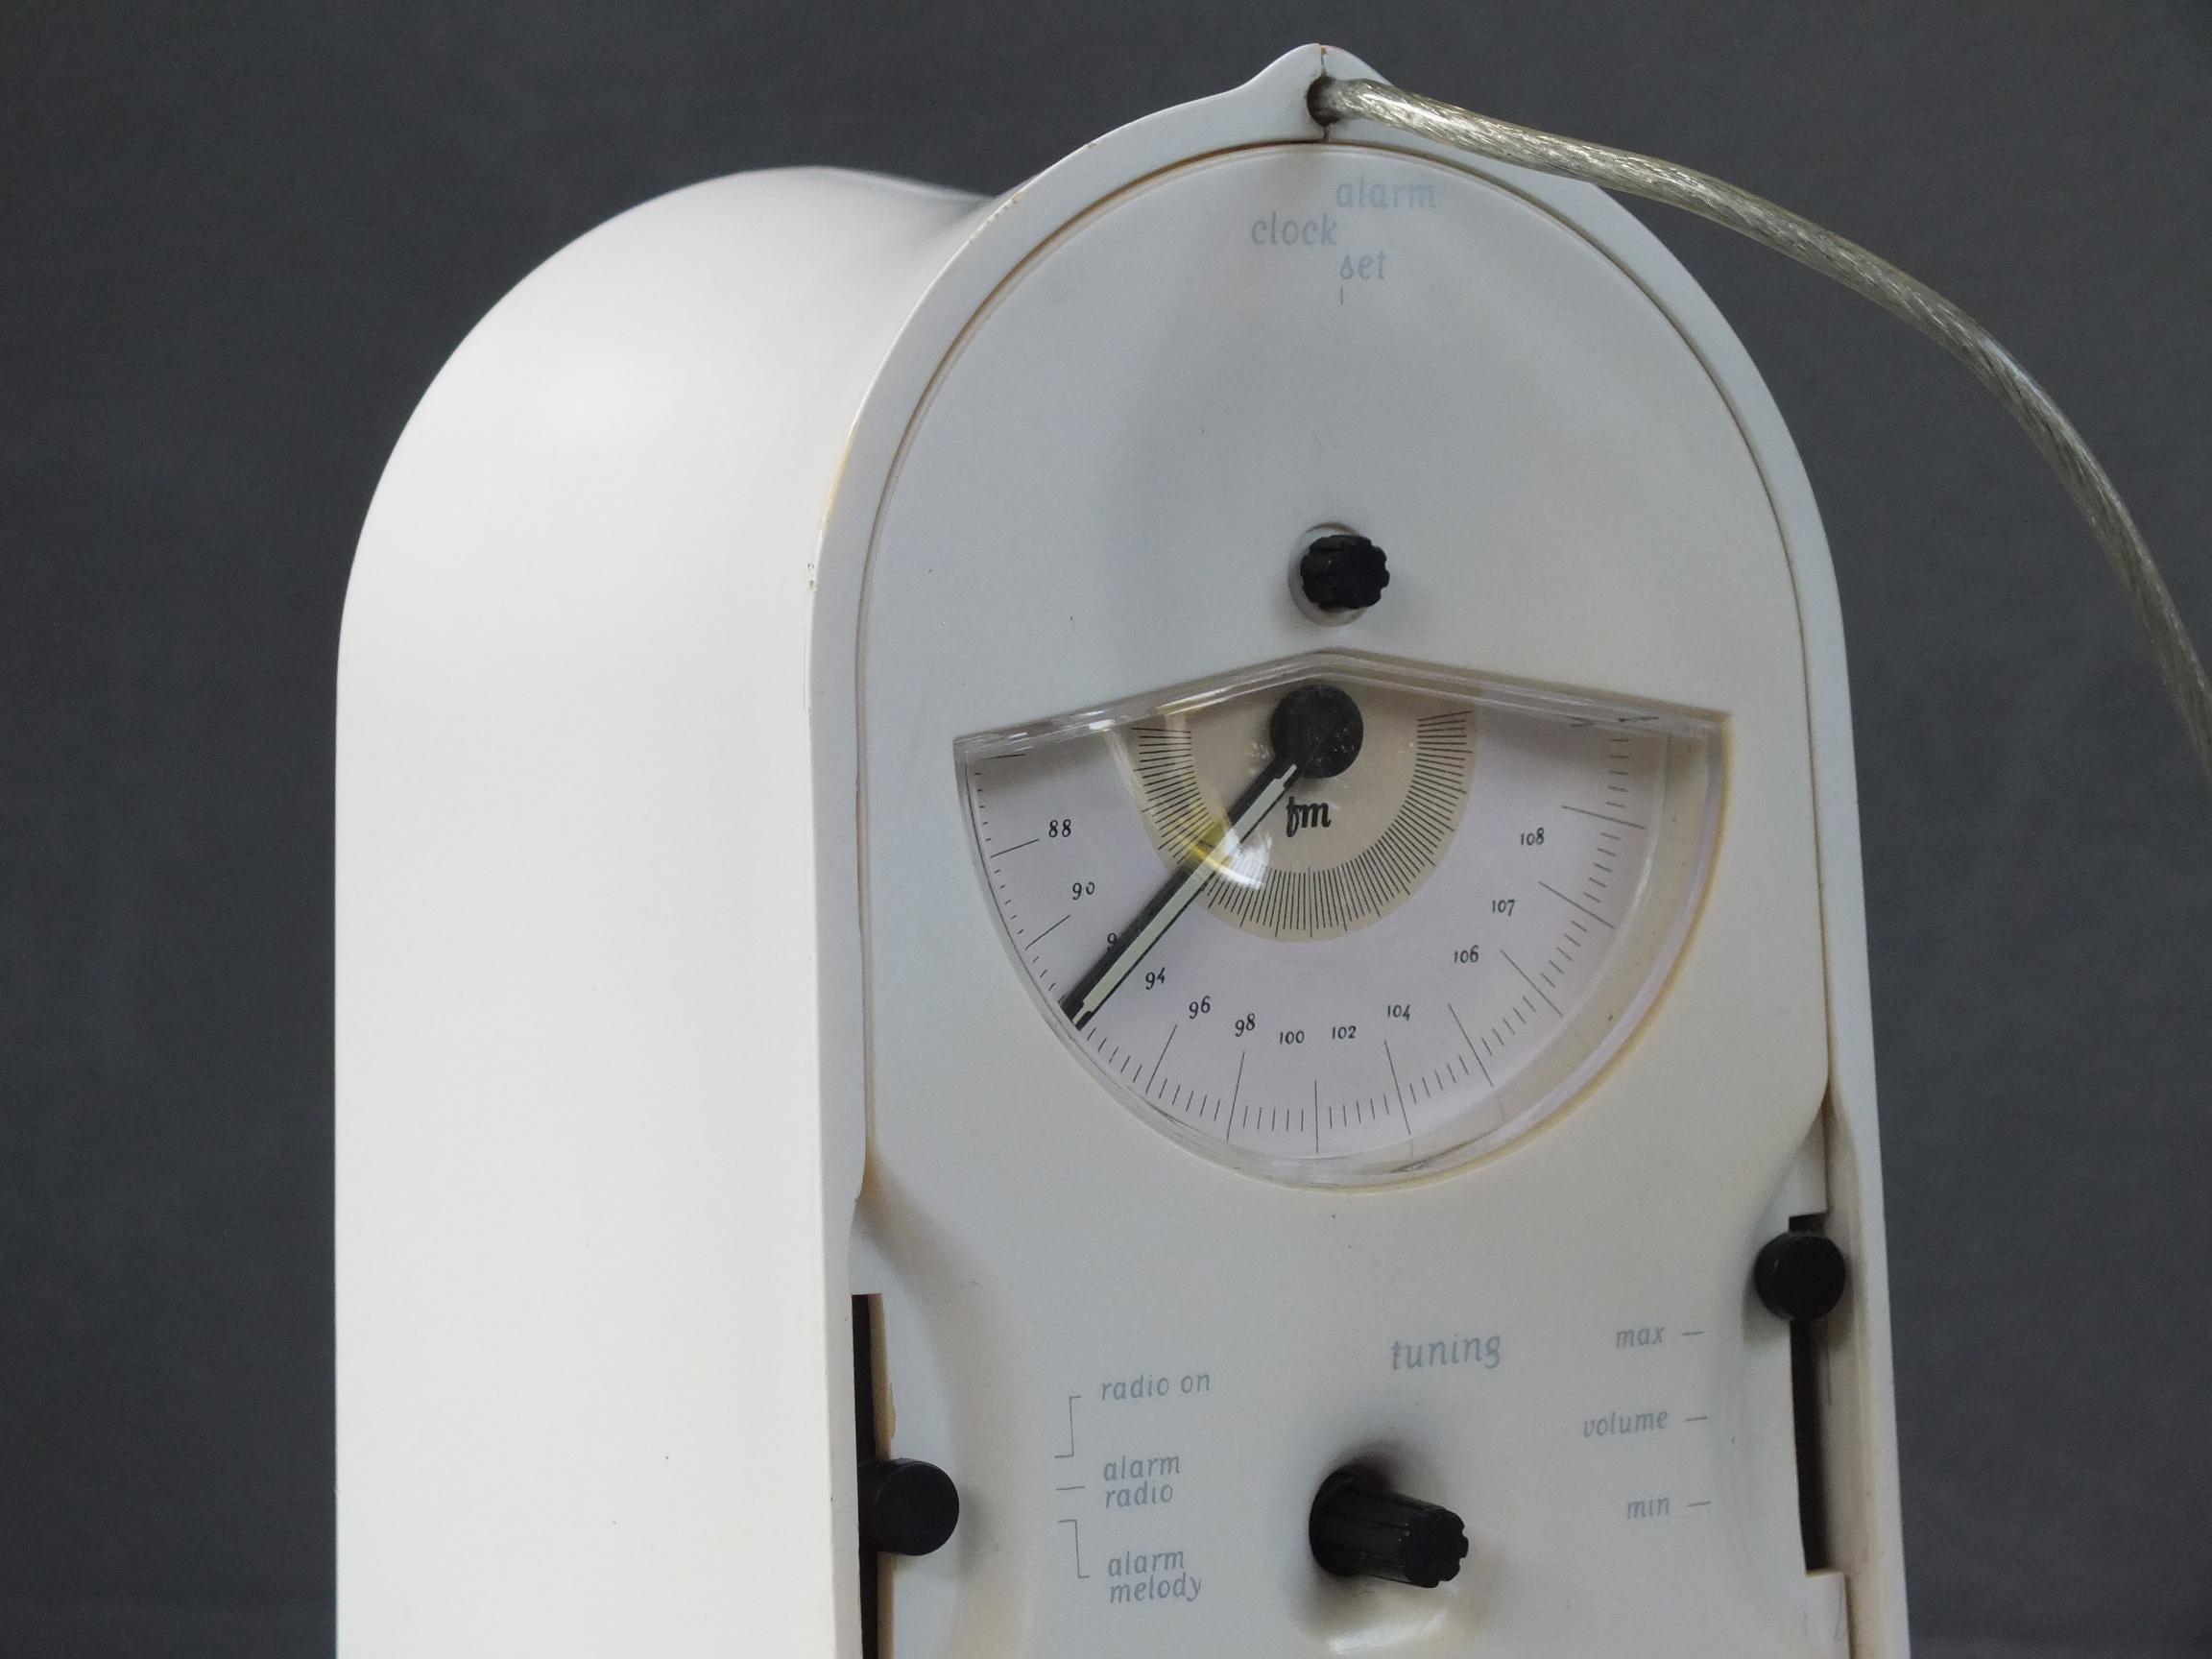 Post-Modern Thomson Prod. Alessi Clock Radio Coo Coo by Pilippe Starck Design Year 1994 For Sale